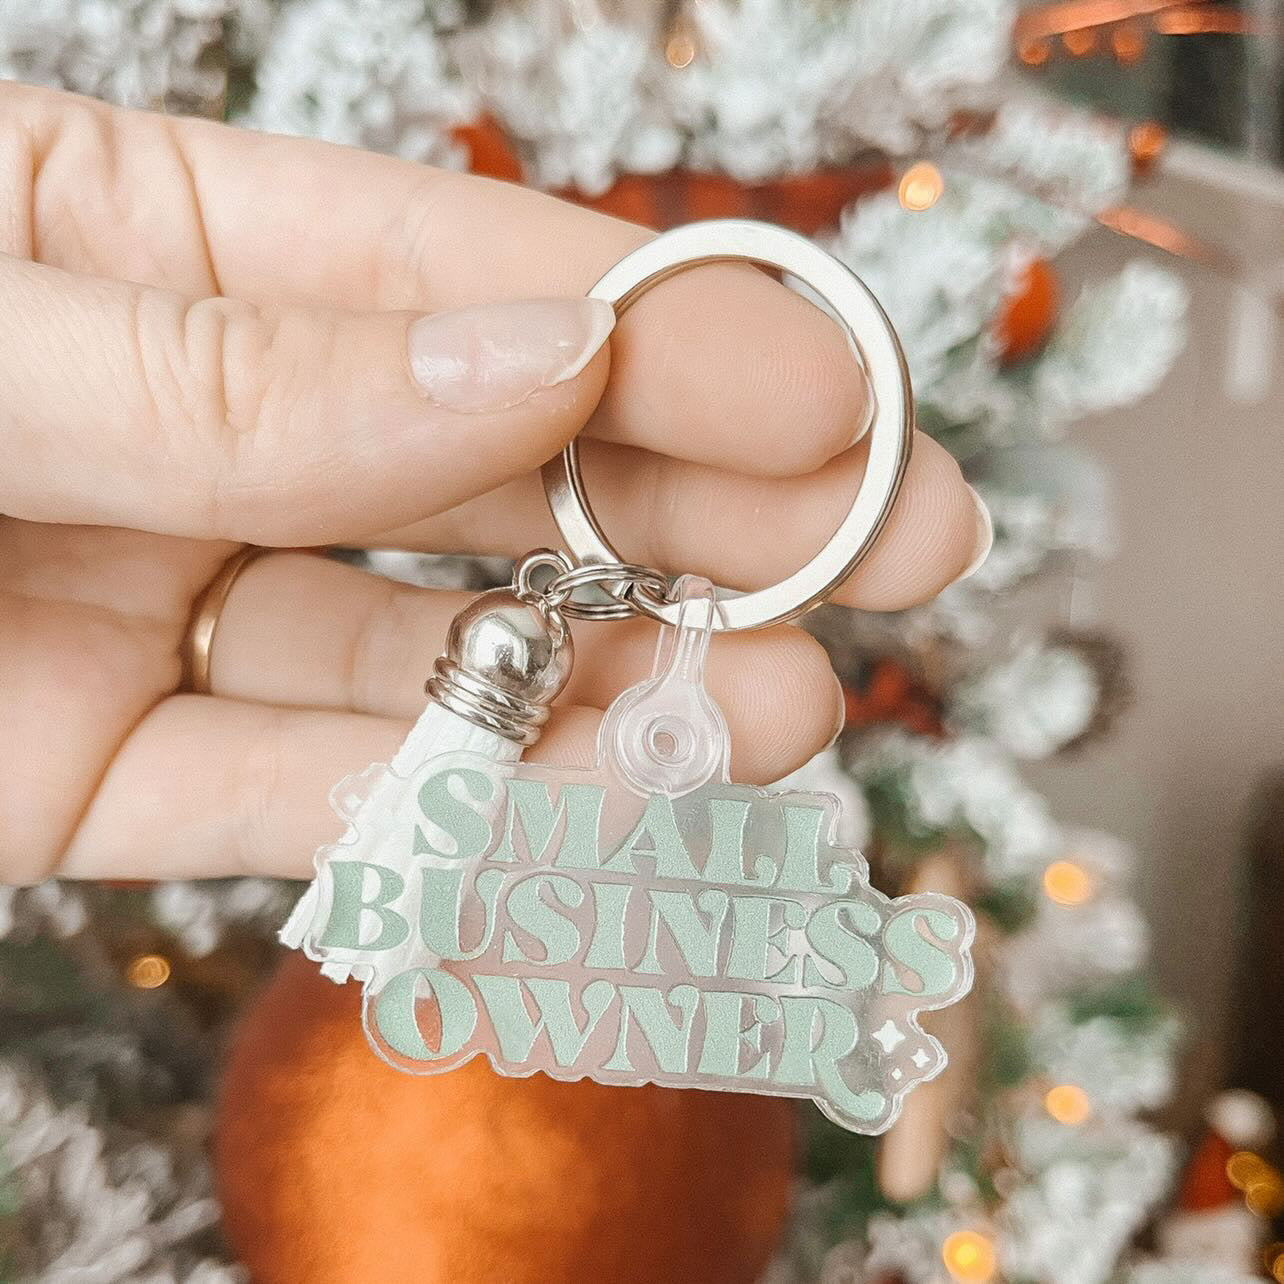 Small Business Owner | Keychain